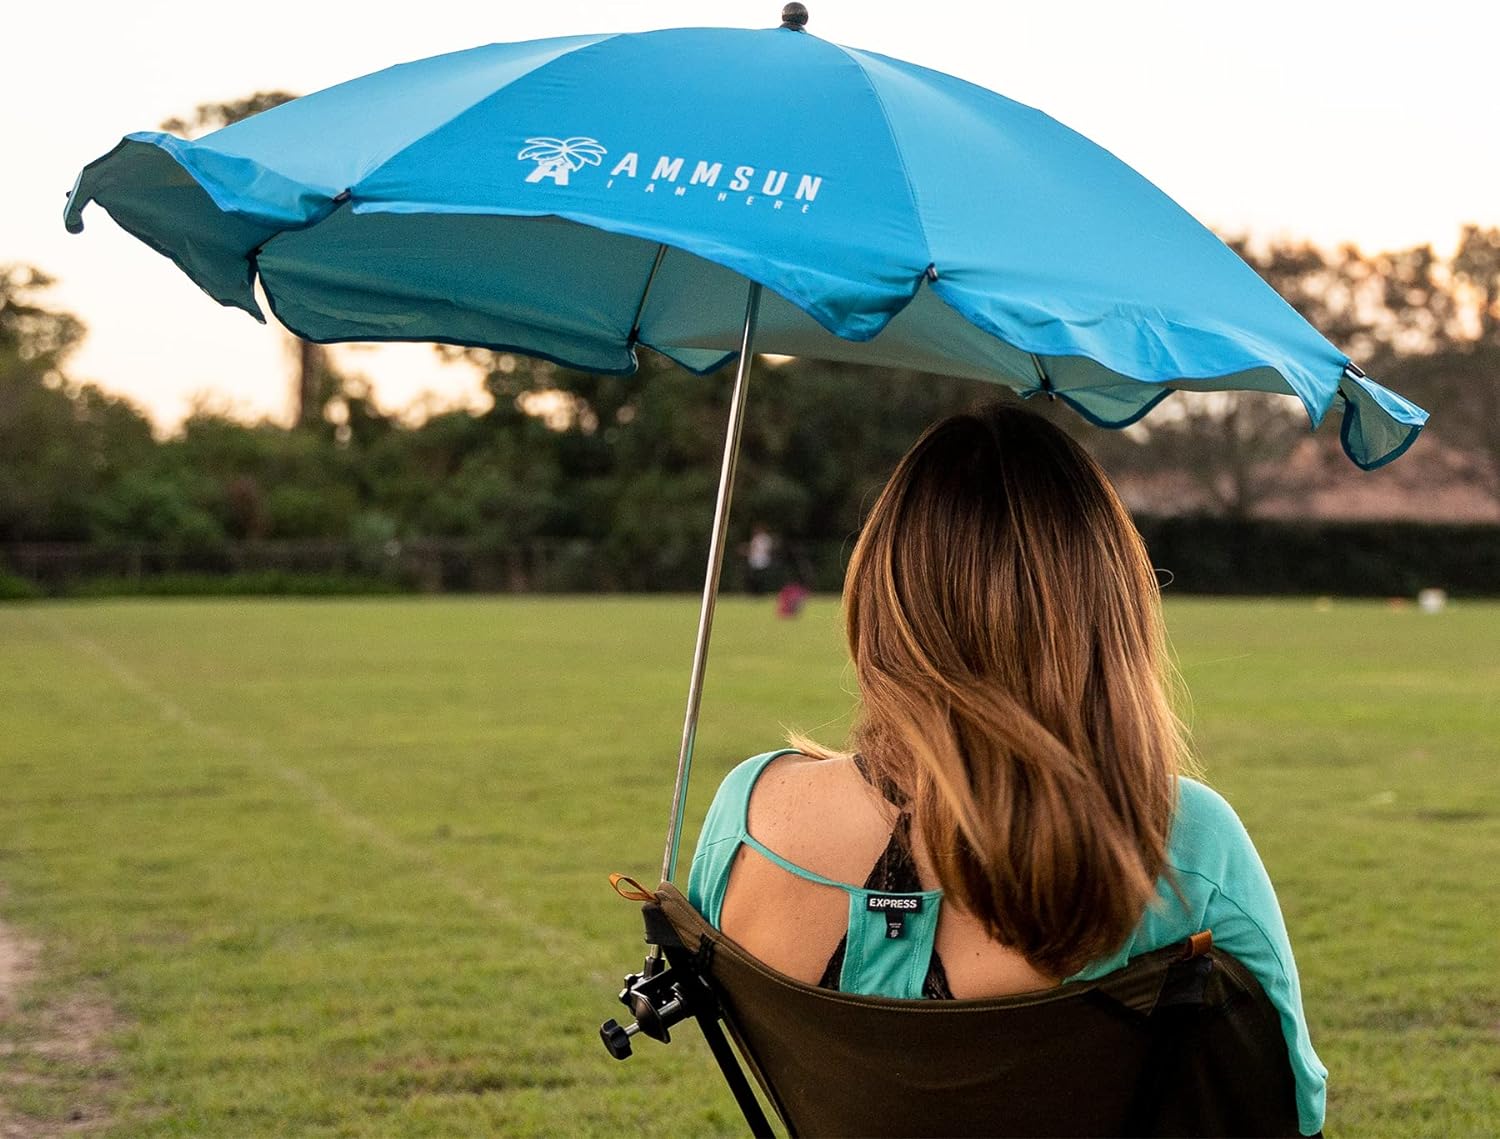 AMMSUN 43 inches Chair Umbrella with Universal Clamp Bright Blue